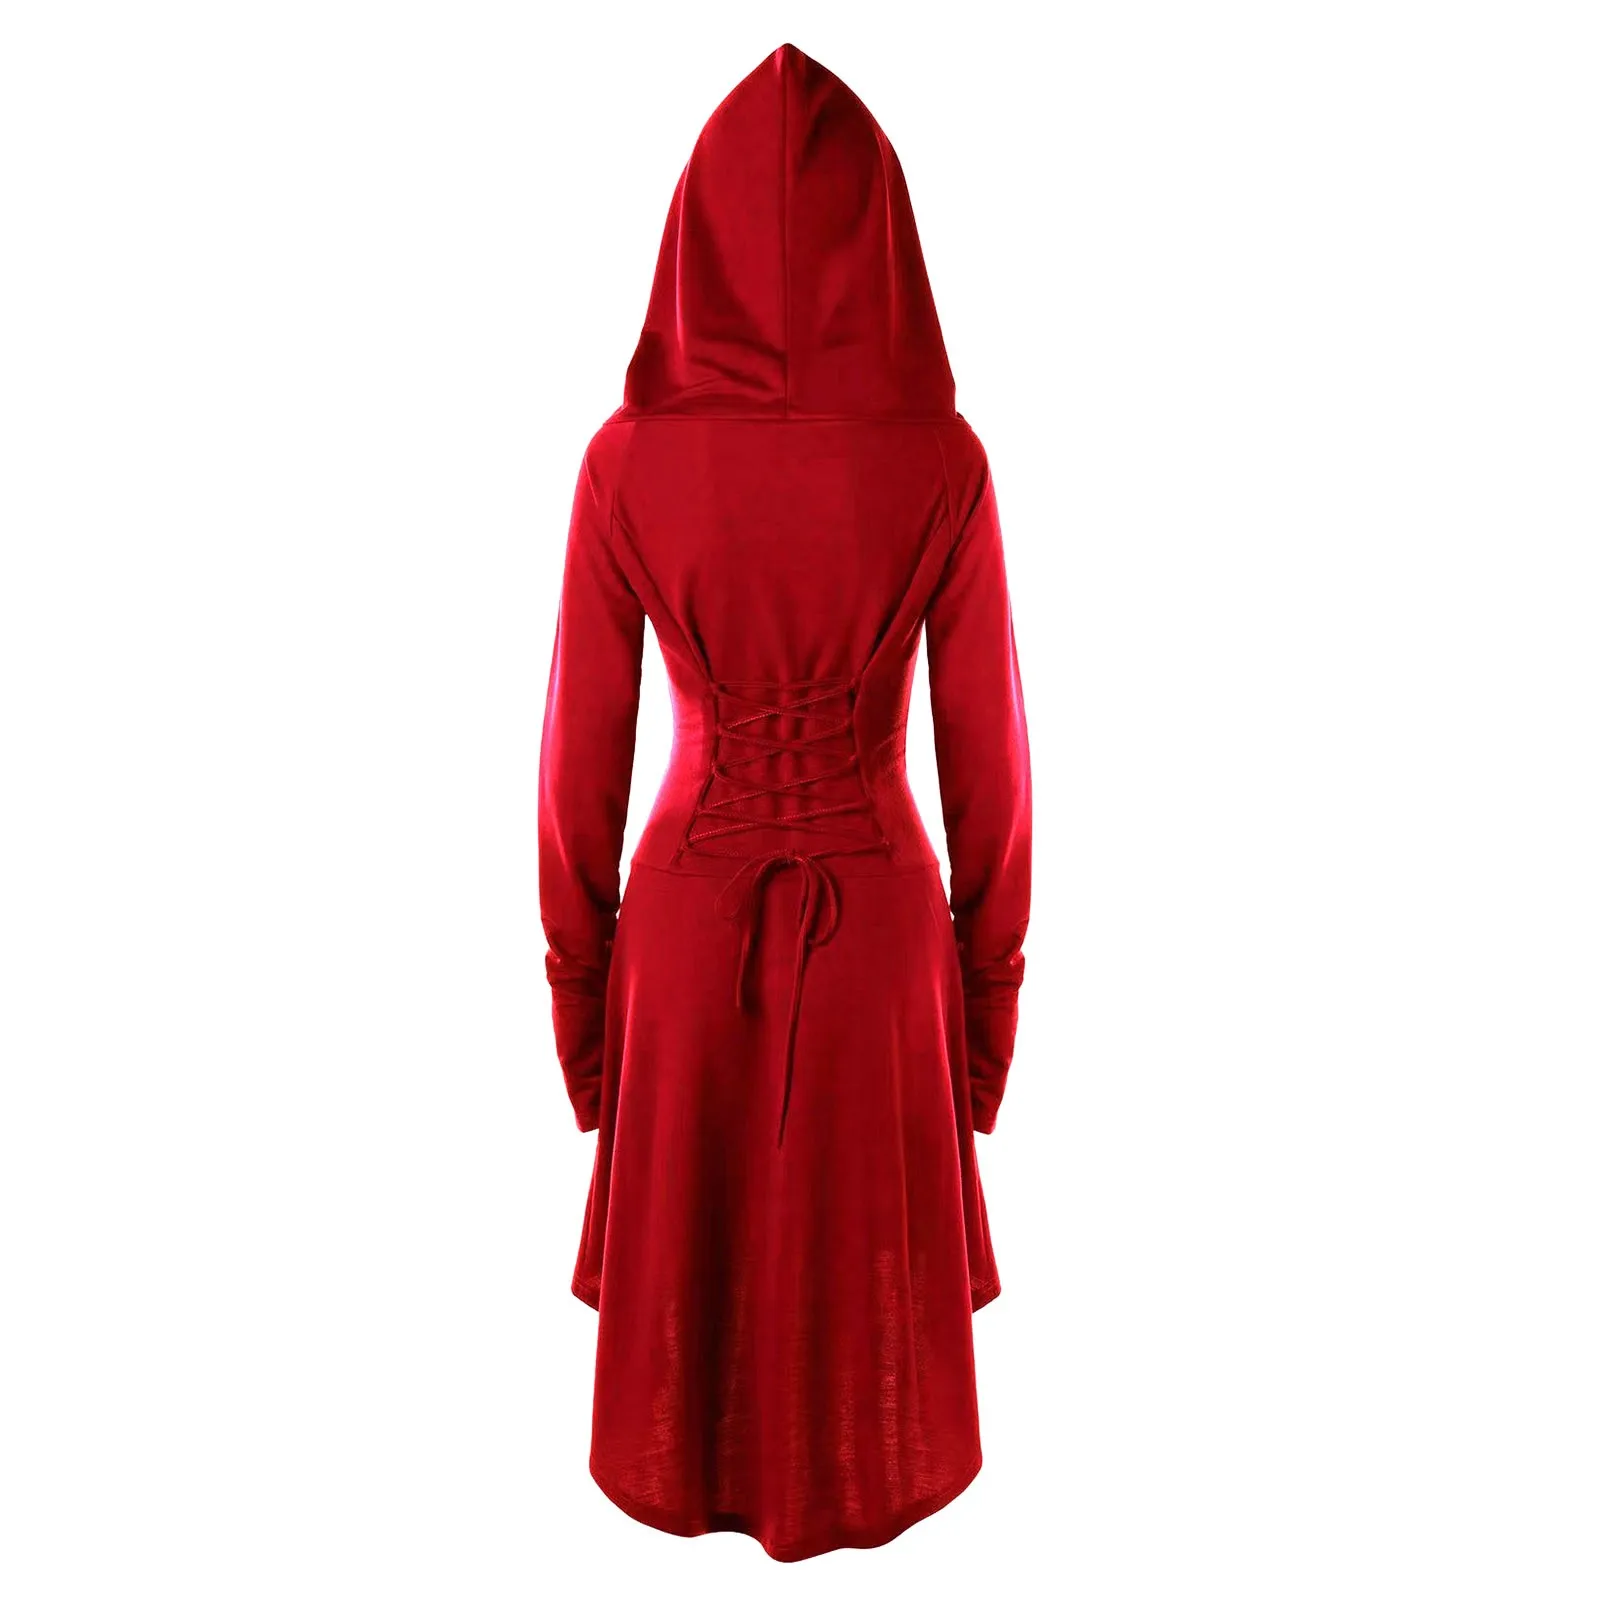 Vintage Women Cosplay Costume Medieval Lace Up Hooded Pullover For Women Victorian Casual High Low Bandage Long Dress Cloak